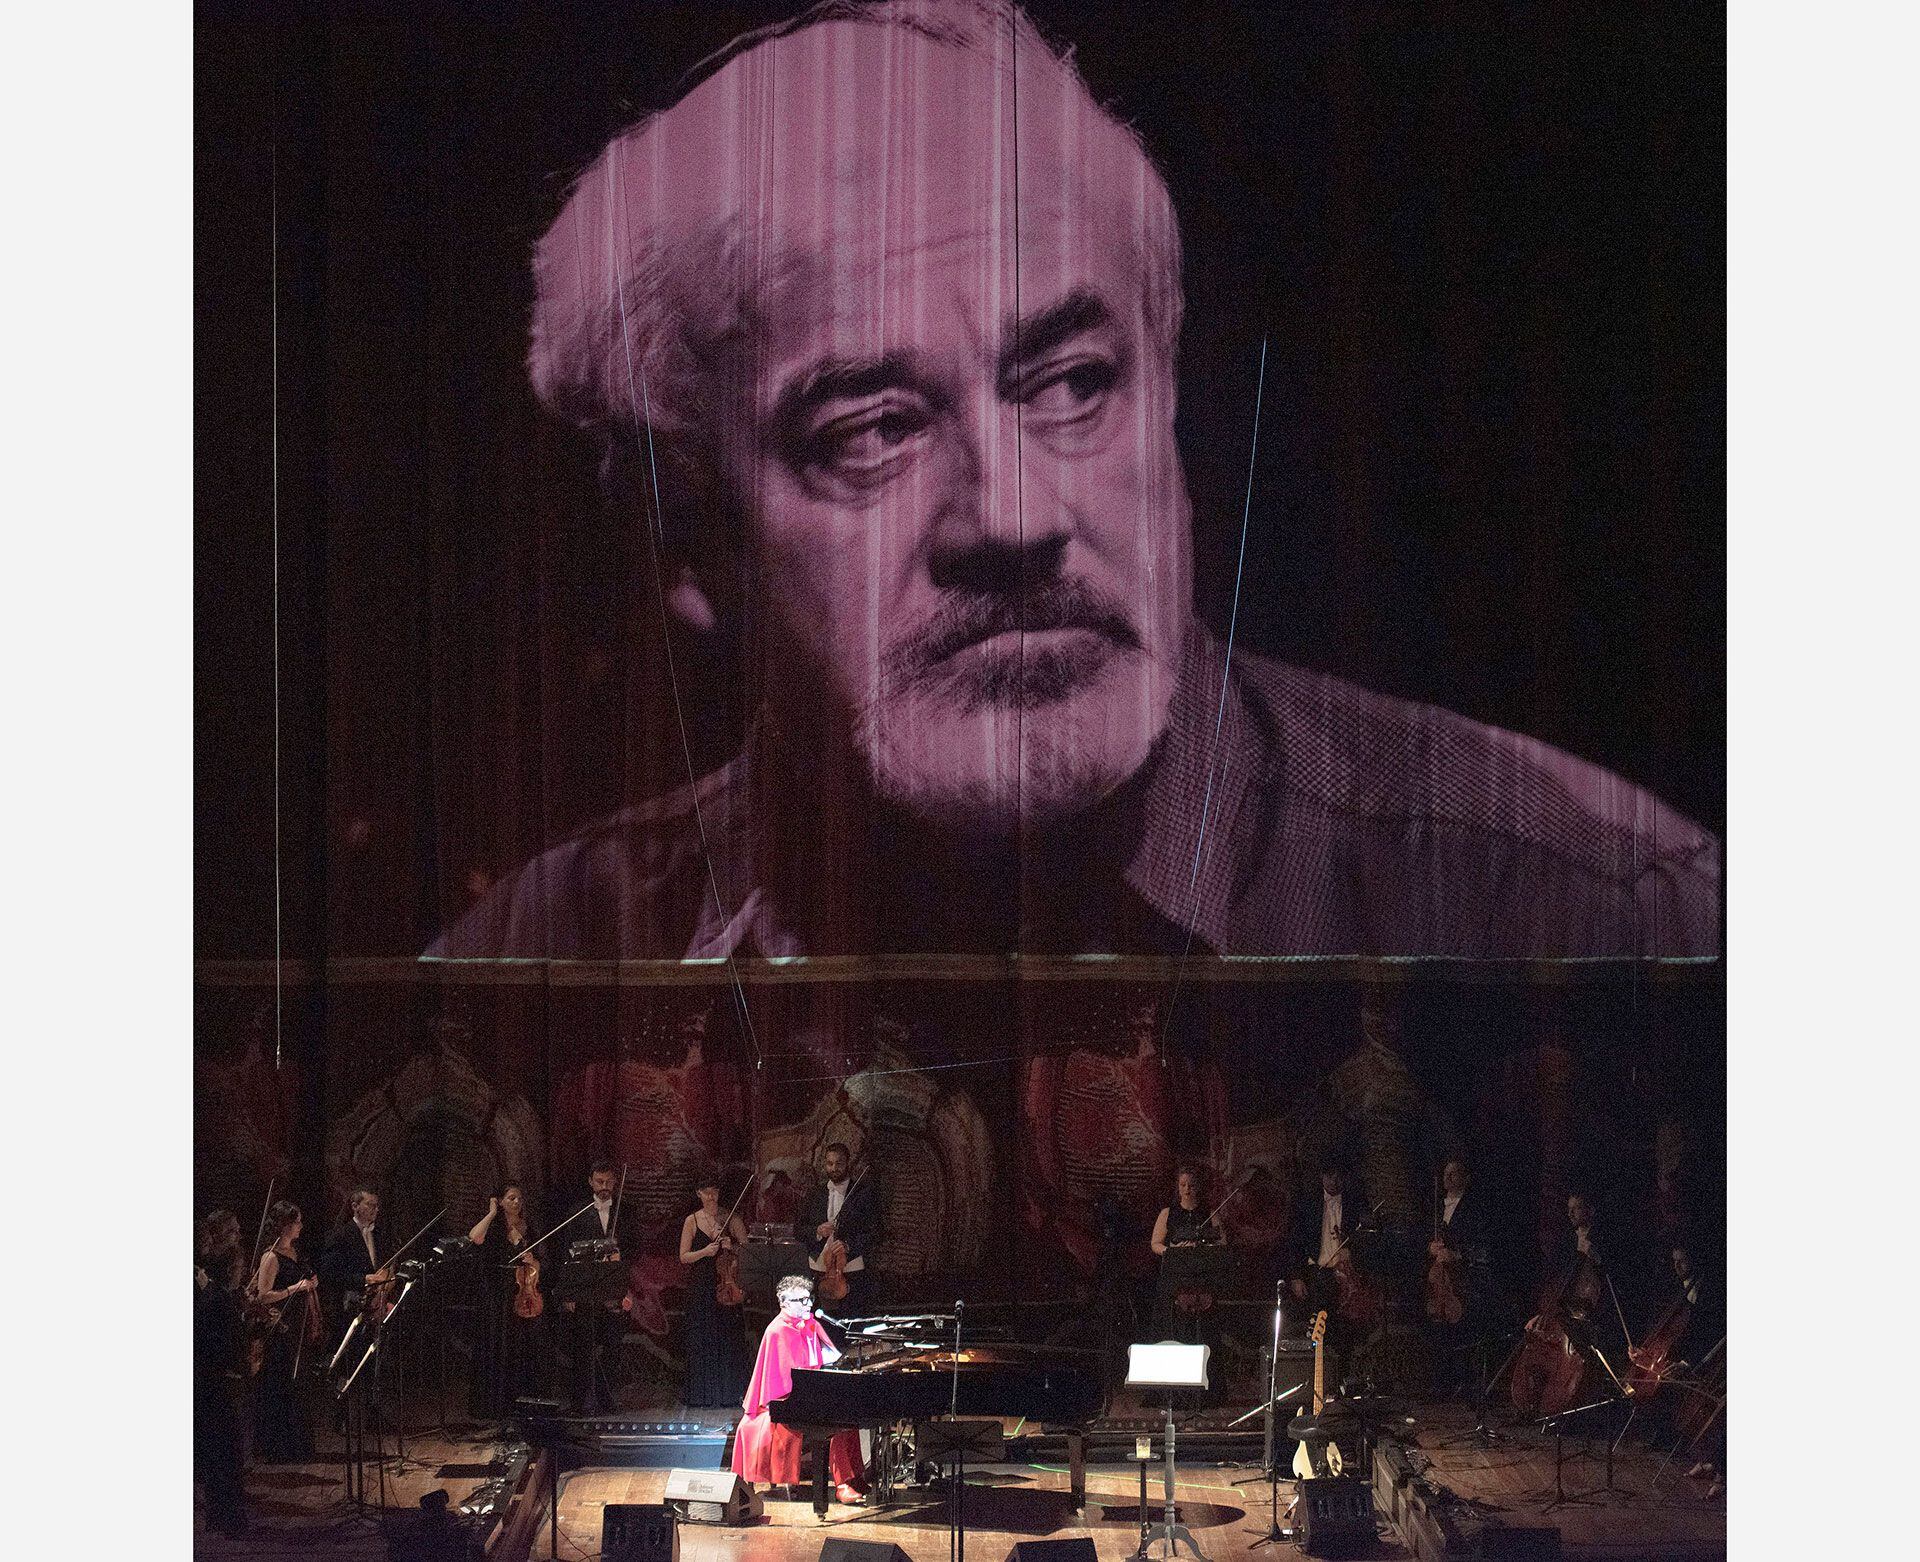 Last night, 10 years after the composer's death, the Rosario musician gave a concert at the great Buenos Aires theater 